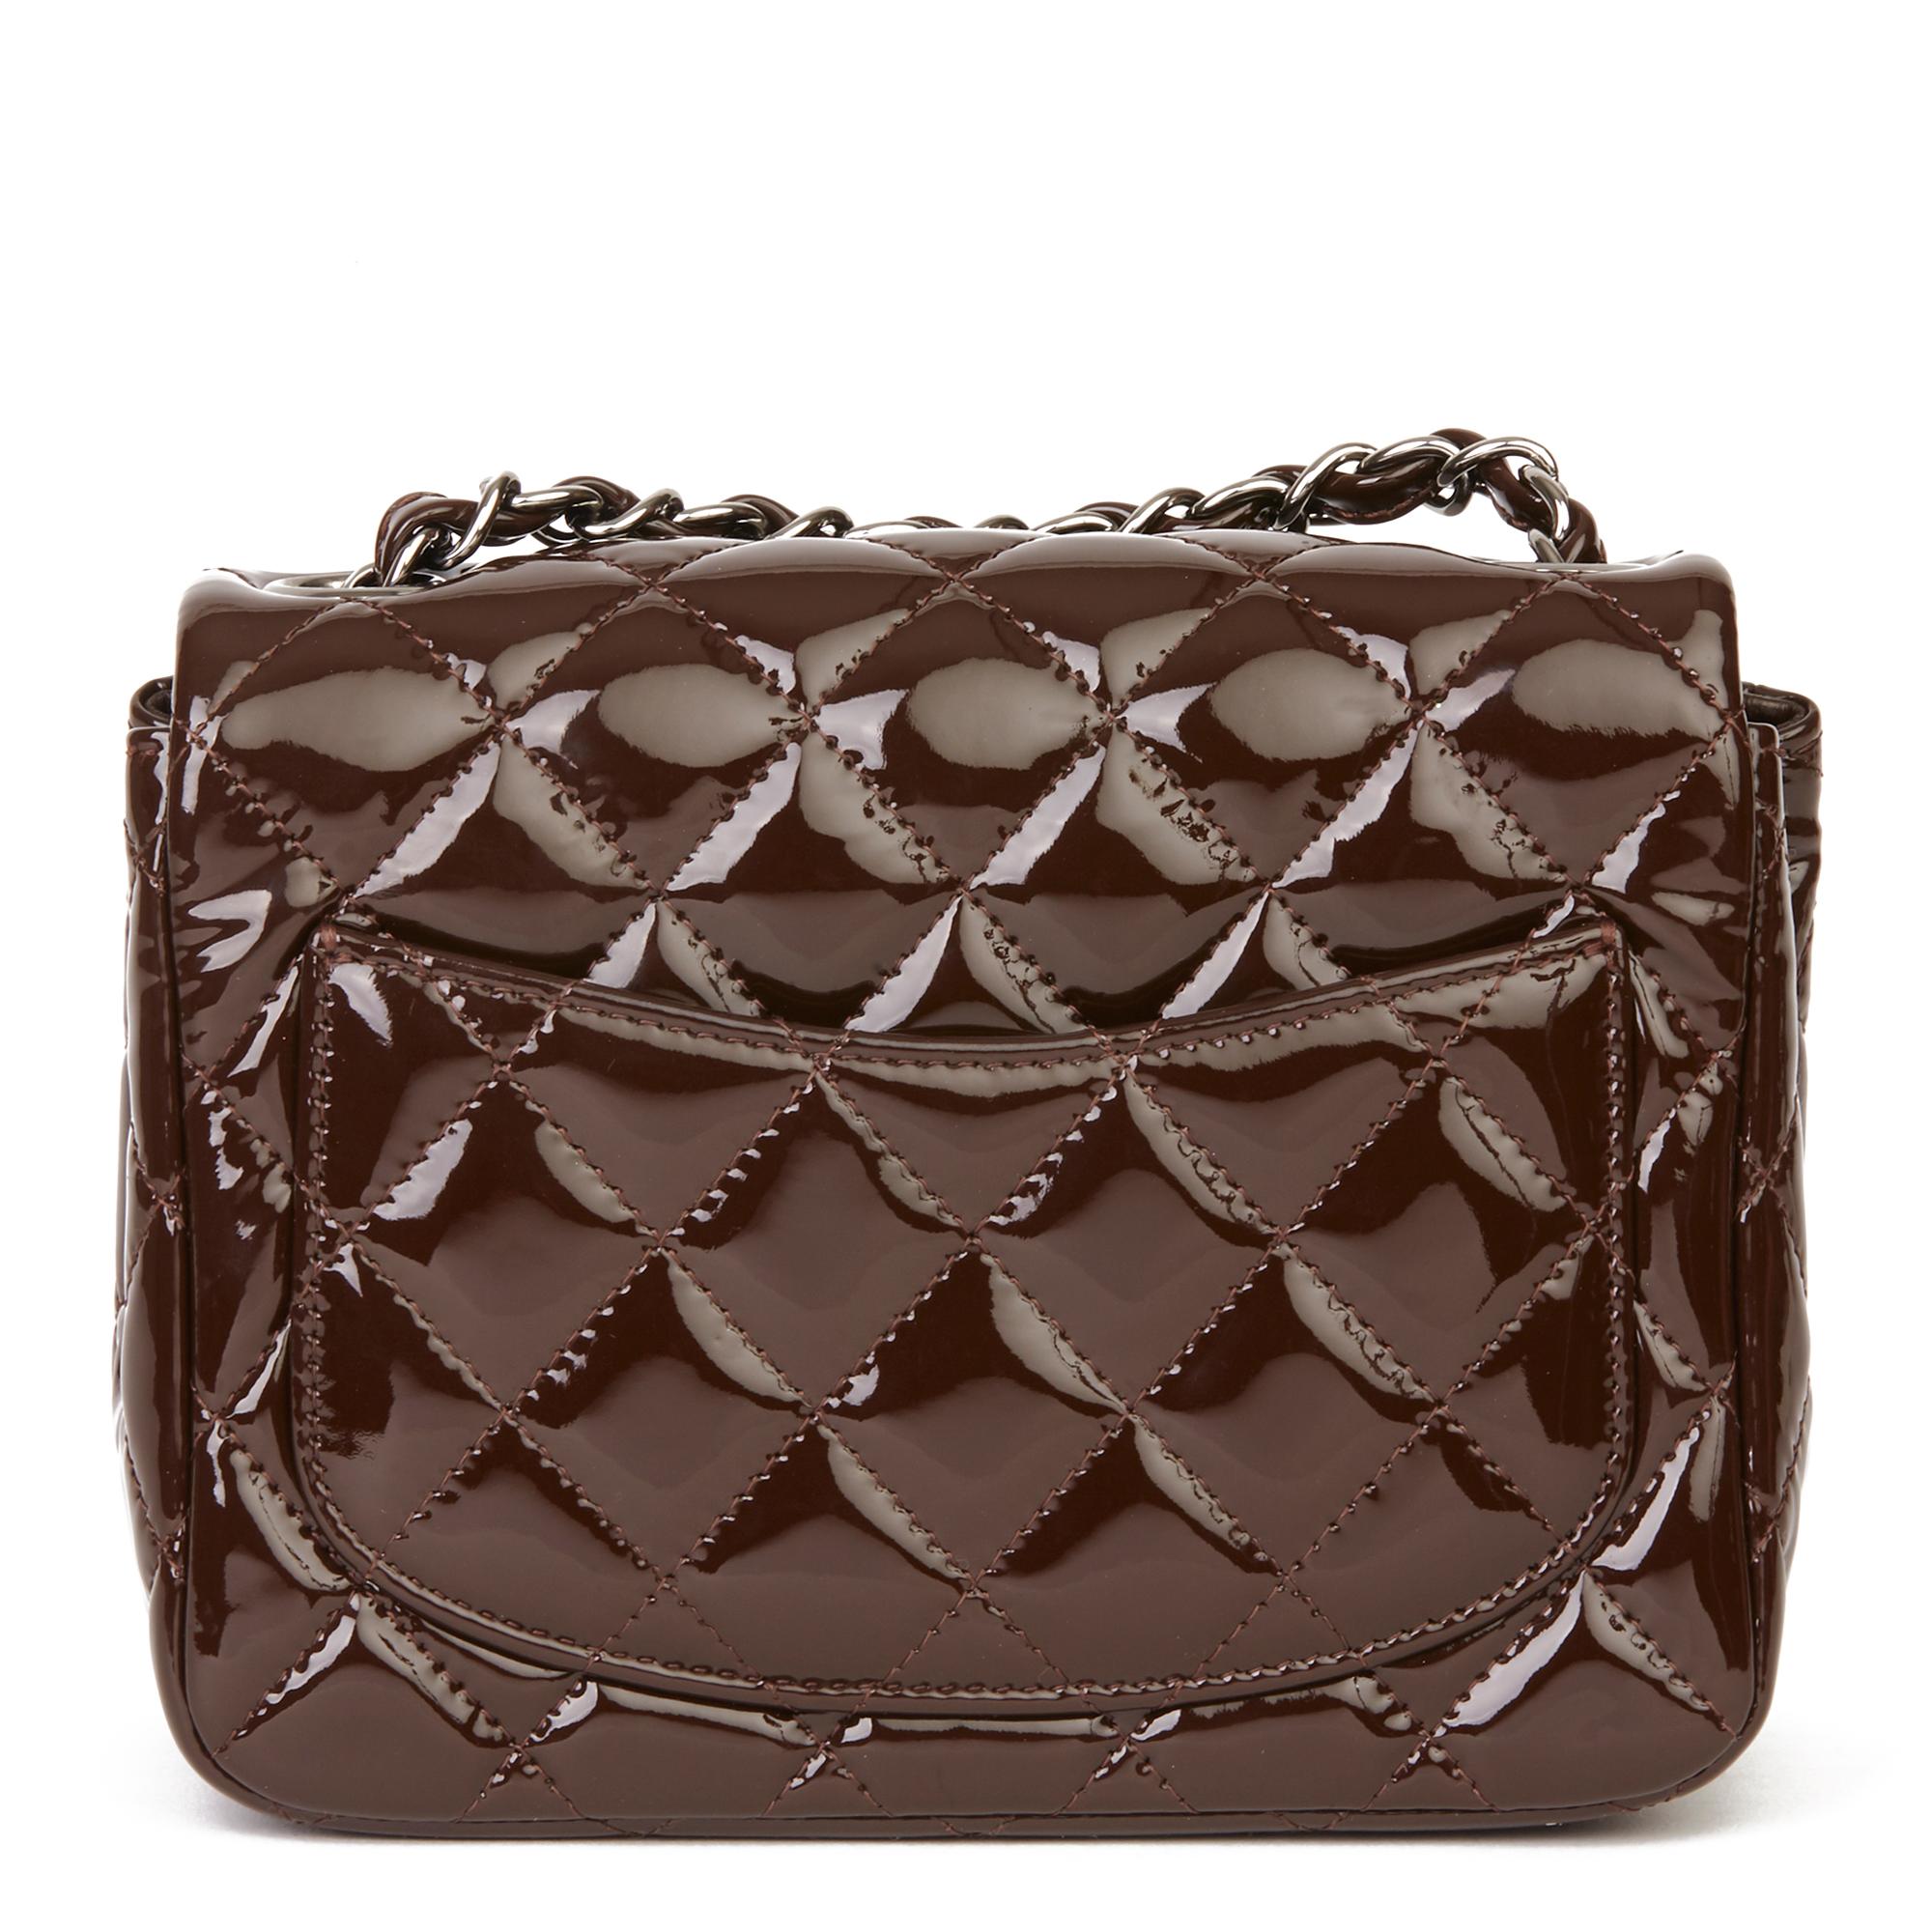 Women's 2014 Chanel Chocolate Brown Quilted Patent Leather Mini Flap Bag